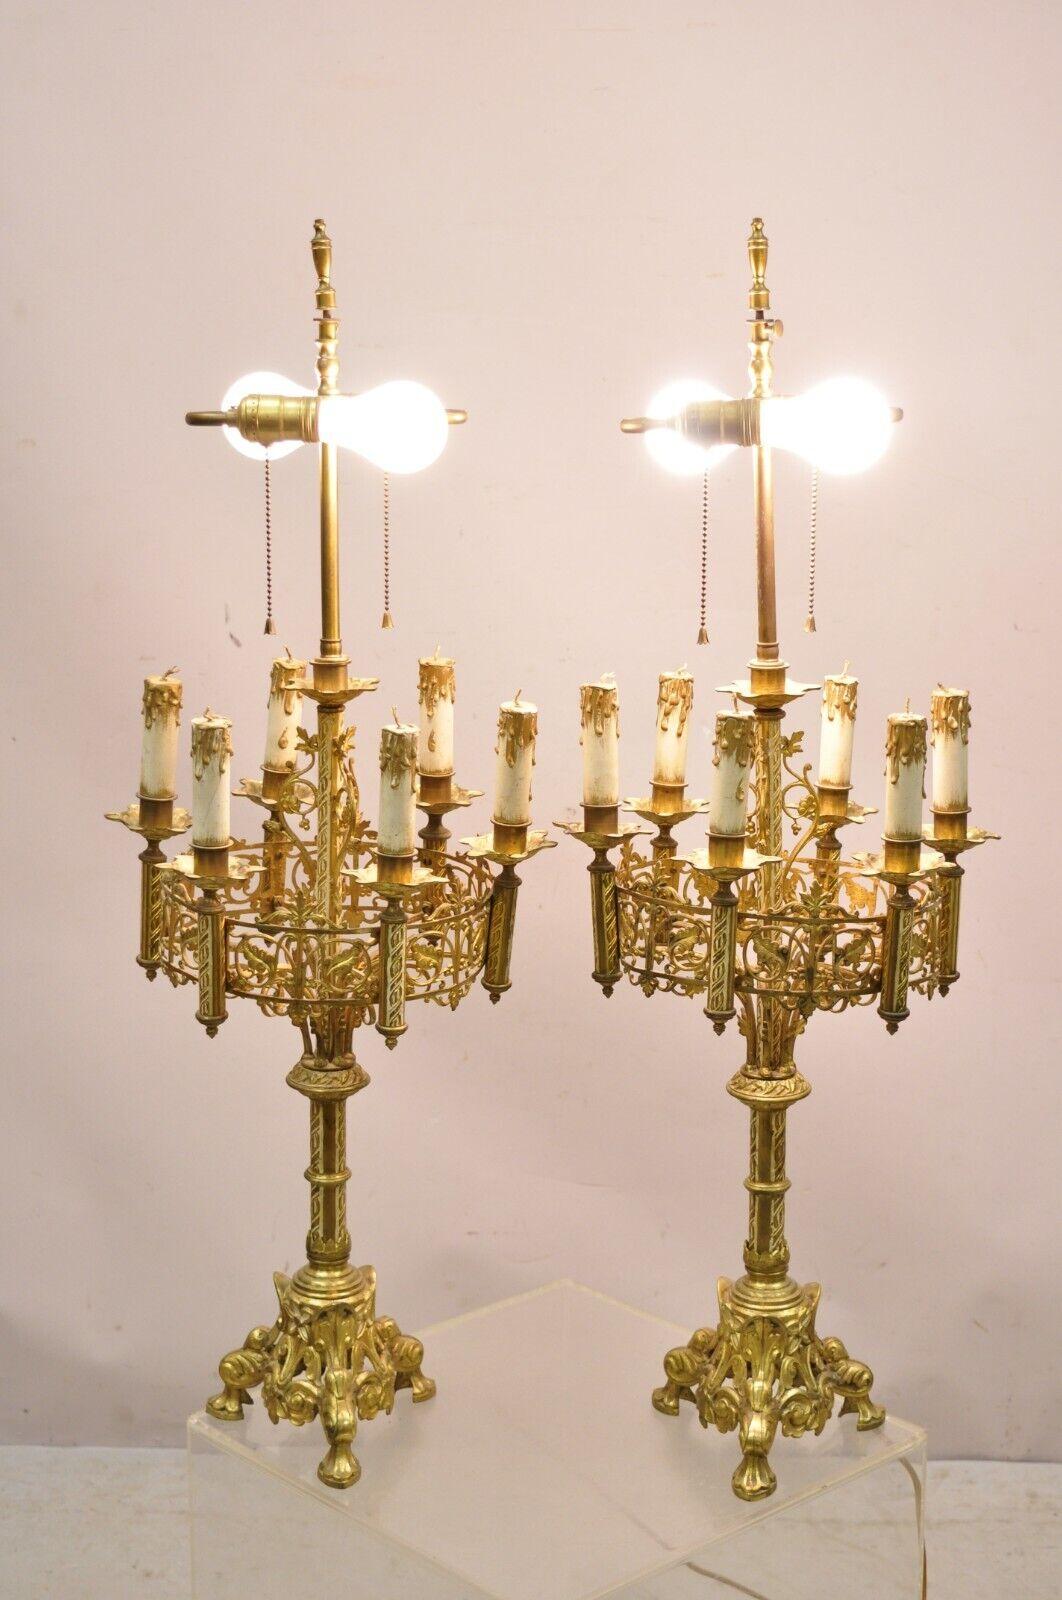 Antique Gothic Revival Gold Bronze Figural Candelabra Table Lamps - a Pair. Item features wooden decorative candles, twin light sockets, pierced decorated frames, very nice antique pair, quality craftsmanship, great style and form. circa Early 20th